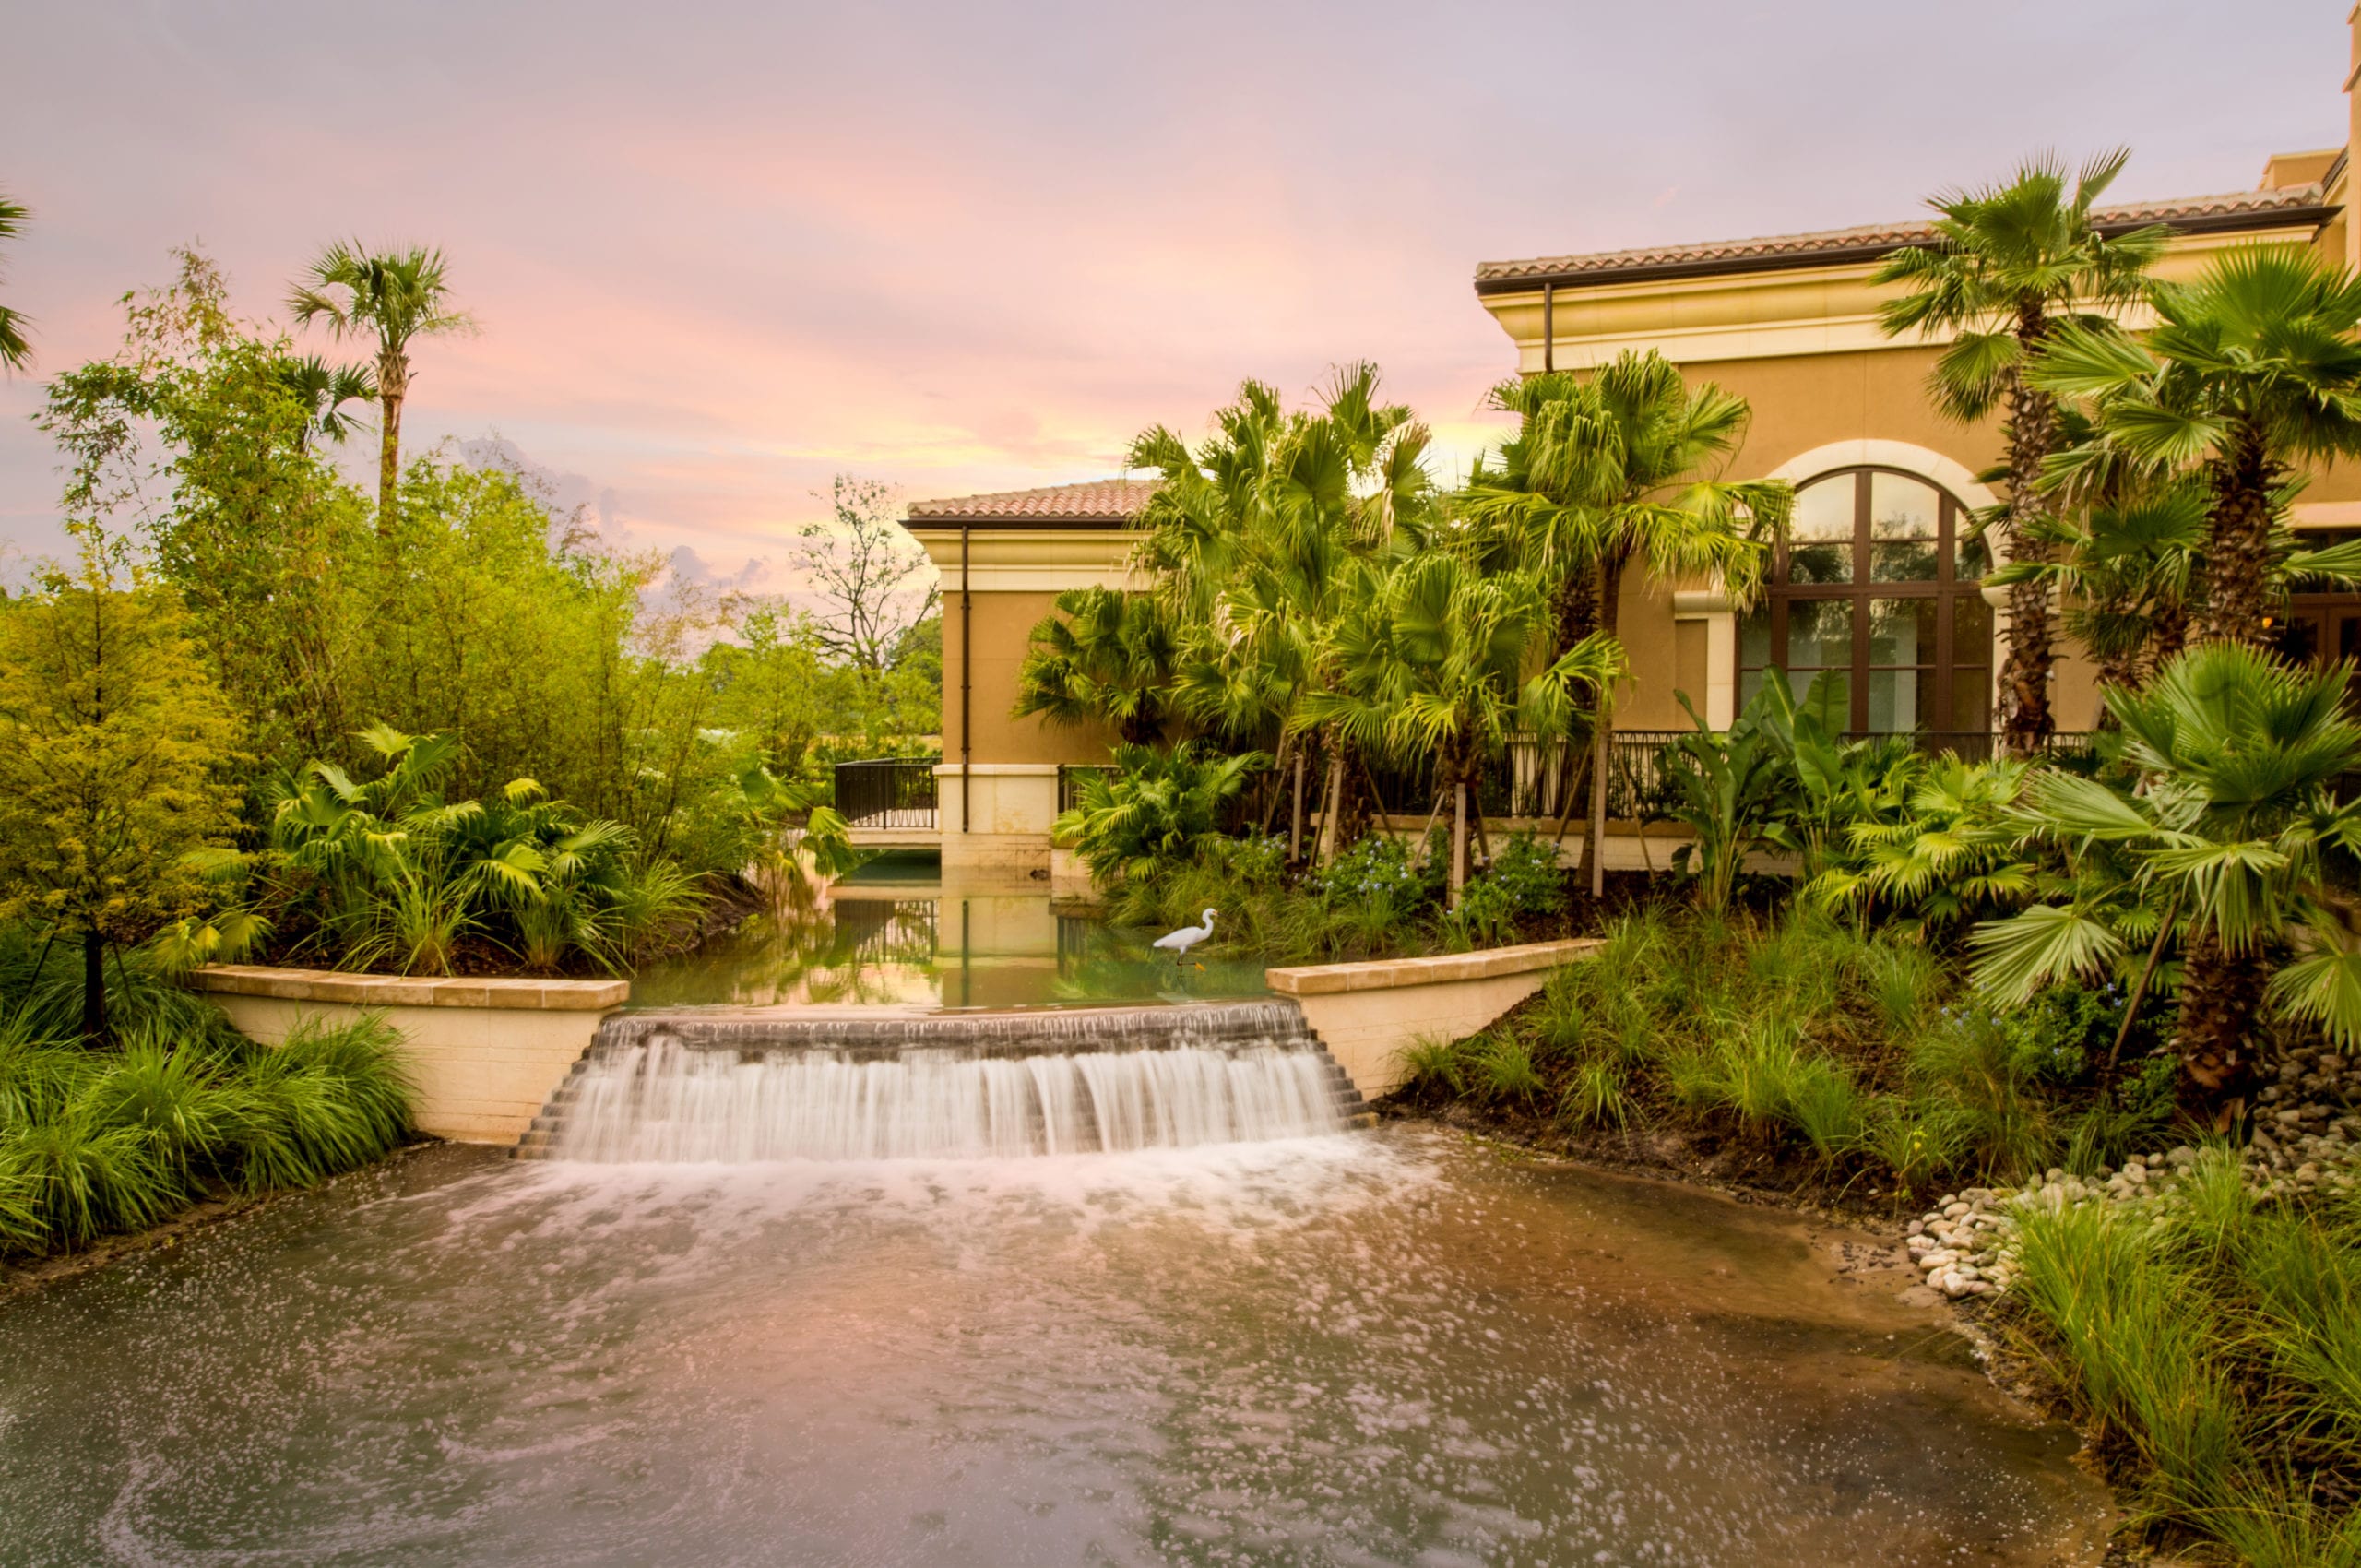 Four Seasons Building with waterfall, foliage, trees and palm trees at dusk